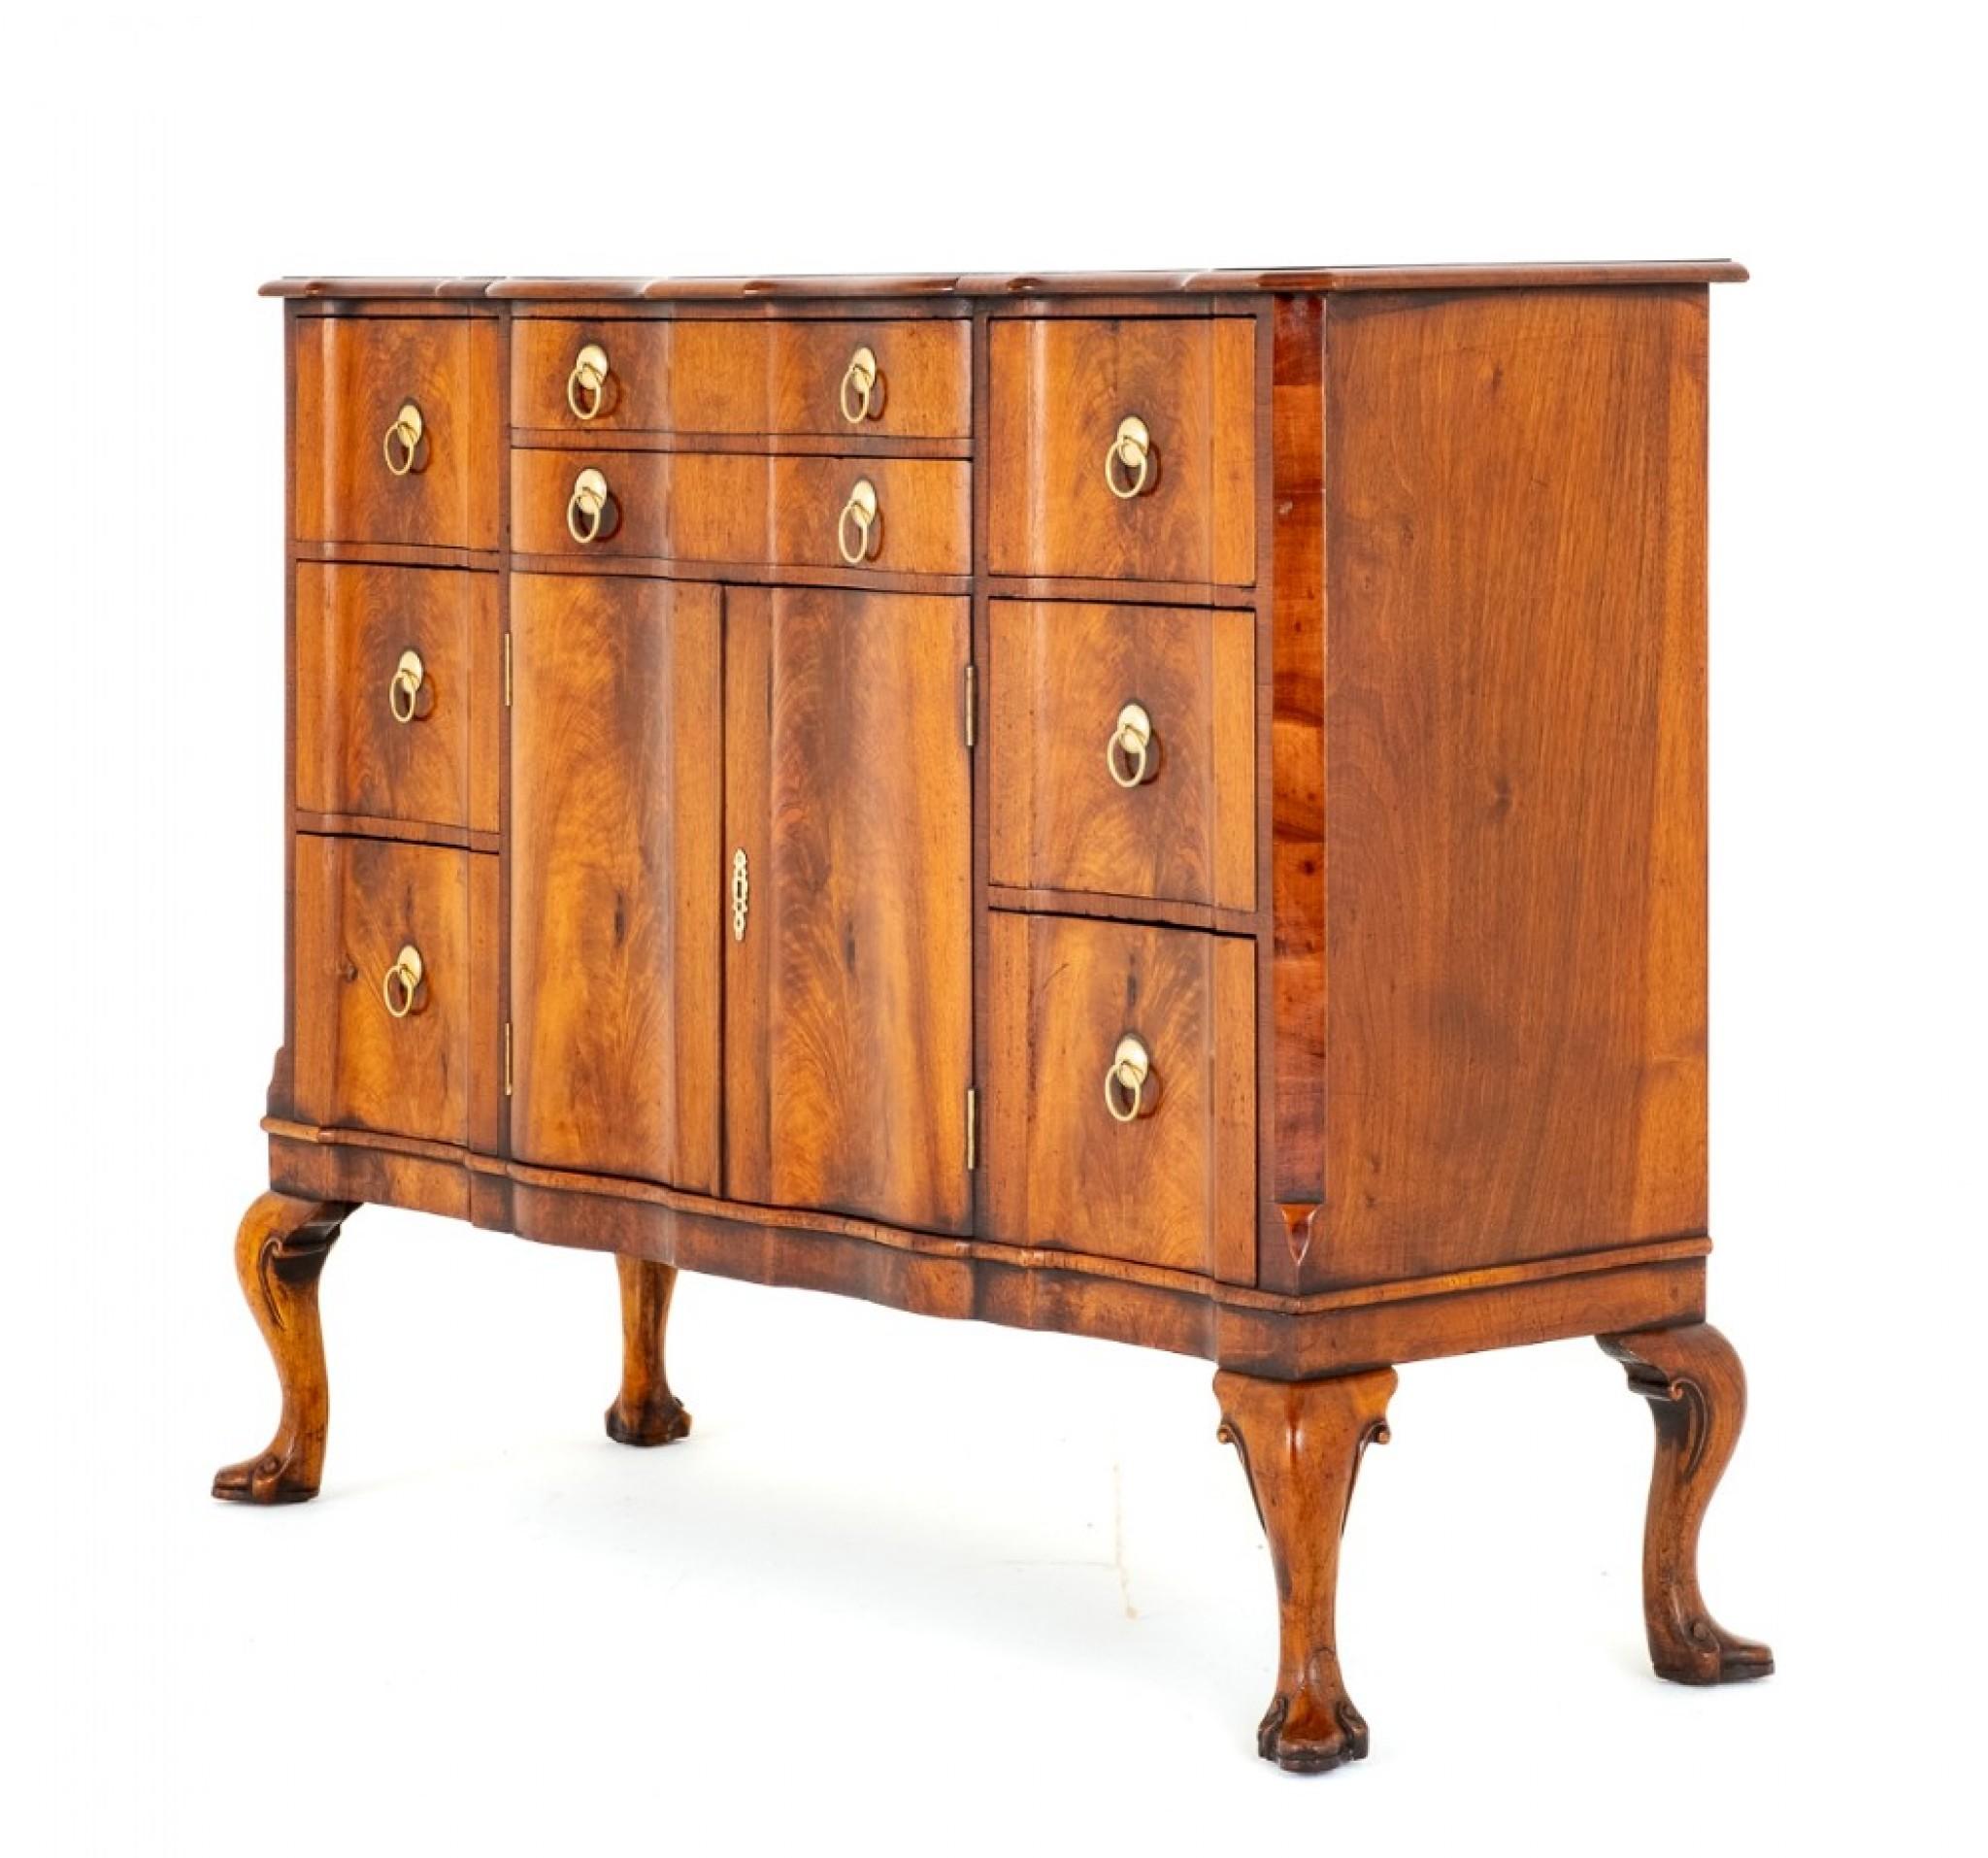 Here we have an Impressive Walnut Side Cabinet.
Standing Upon Cabriole Legs with Carved and Shaped Feet. Circa 1920
The Cabinet Features an Arrangement of 8 Oak Lined Drawers which Feature Period Style Brass Ring Pull Handles.
The Central Doors